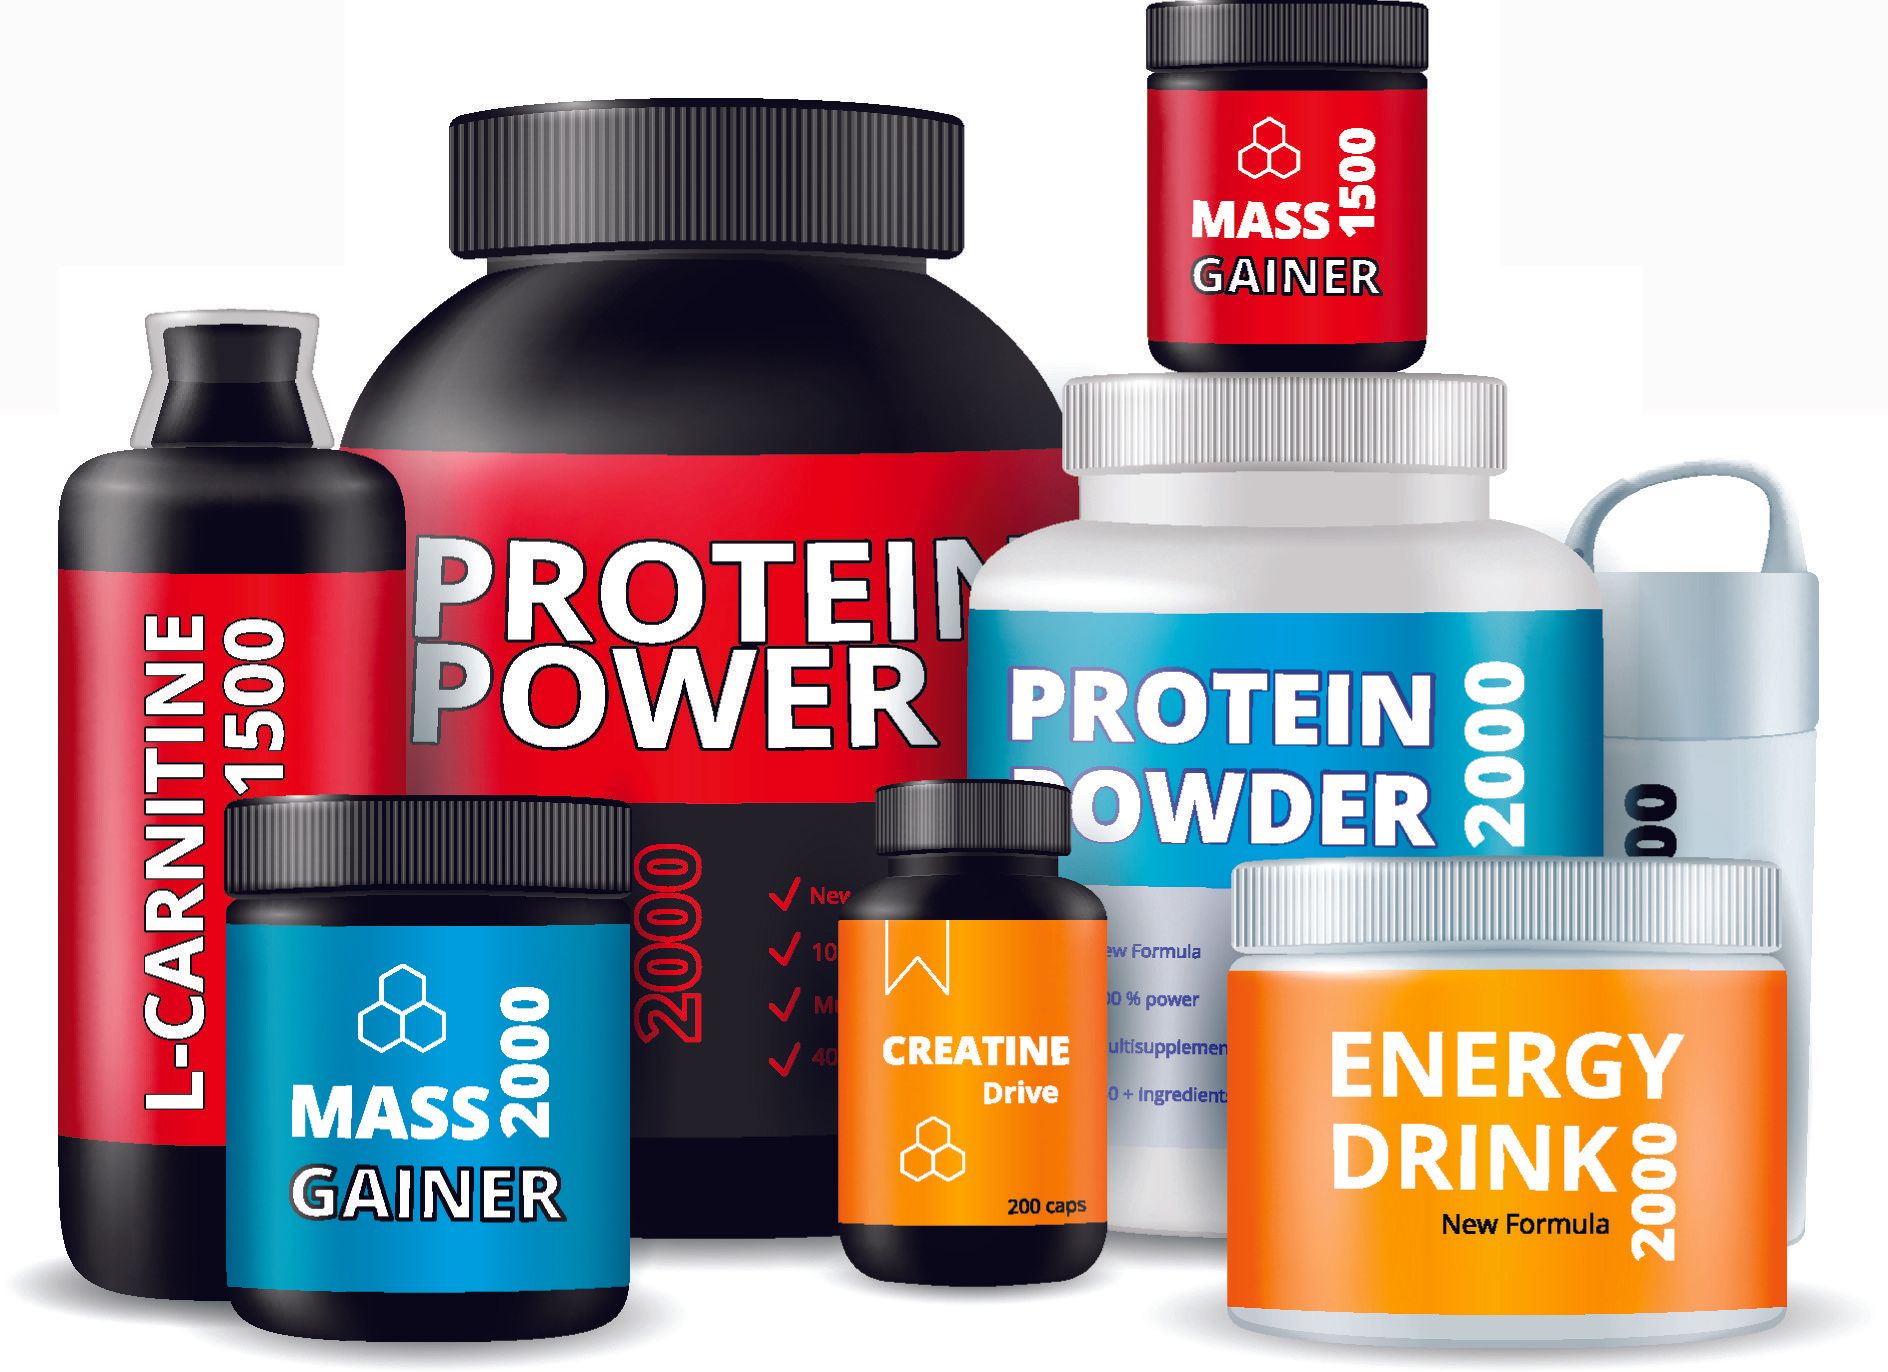 Plastic jars of protein powder and energy drink.